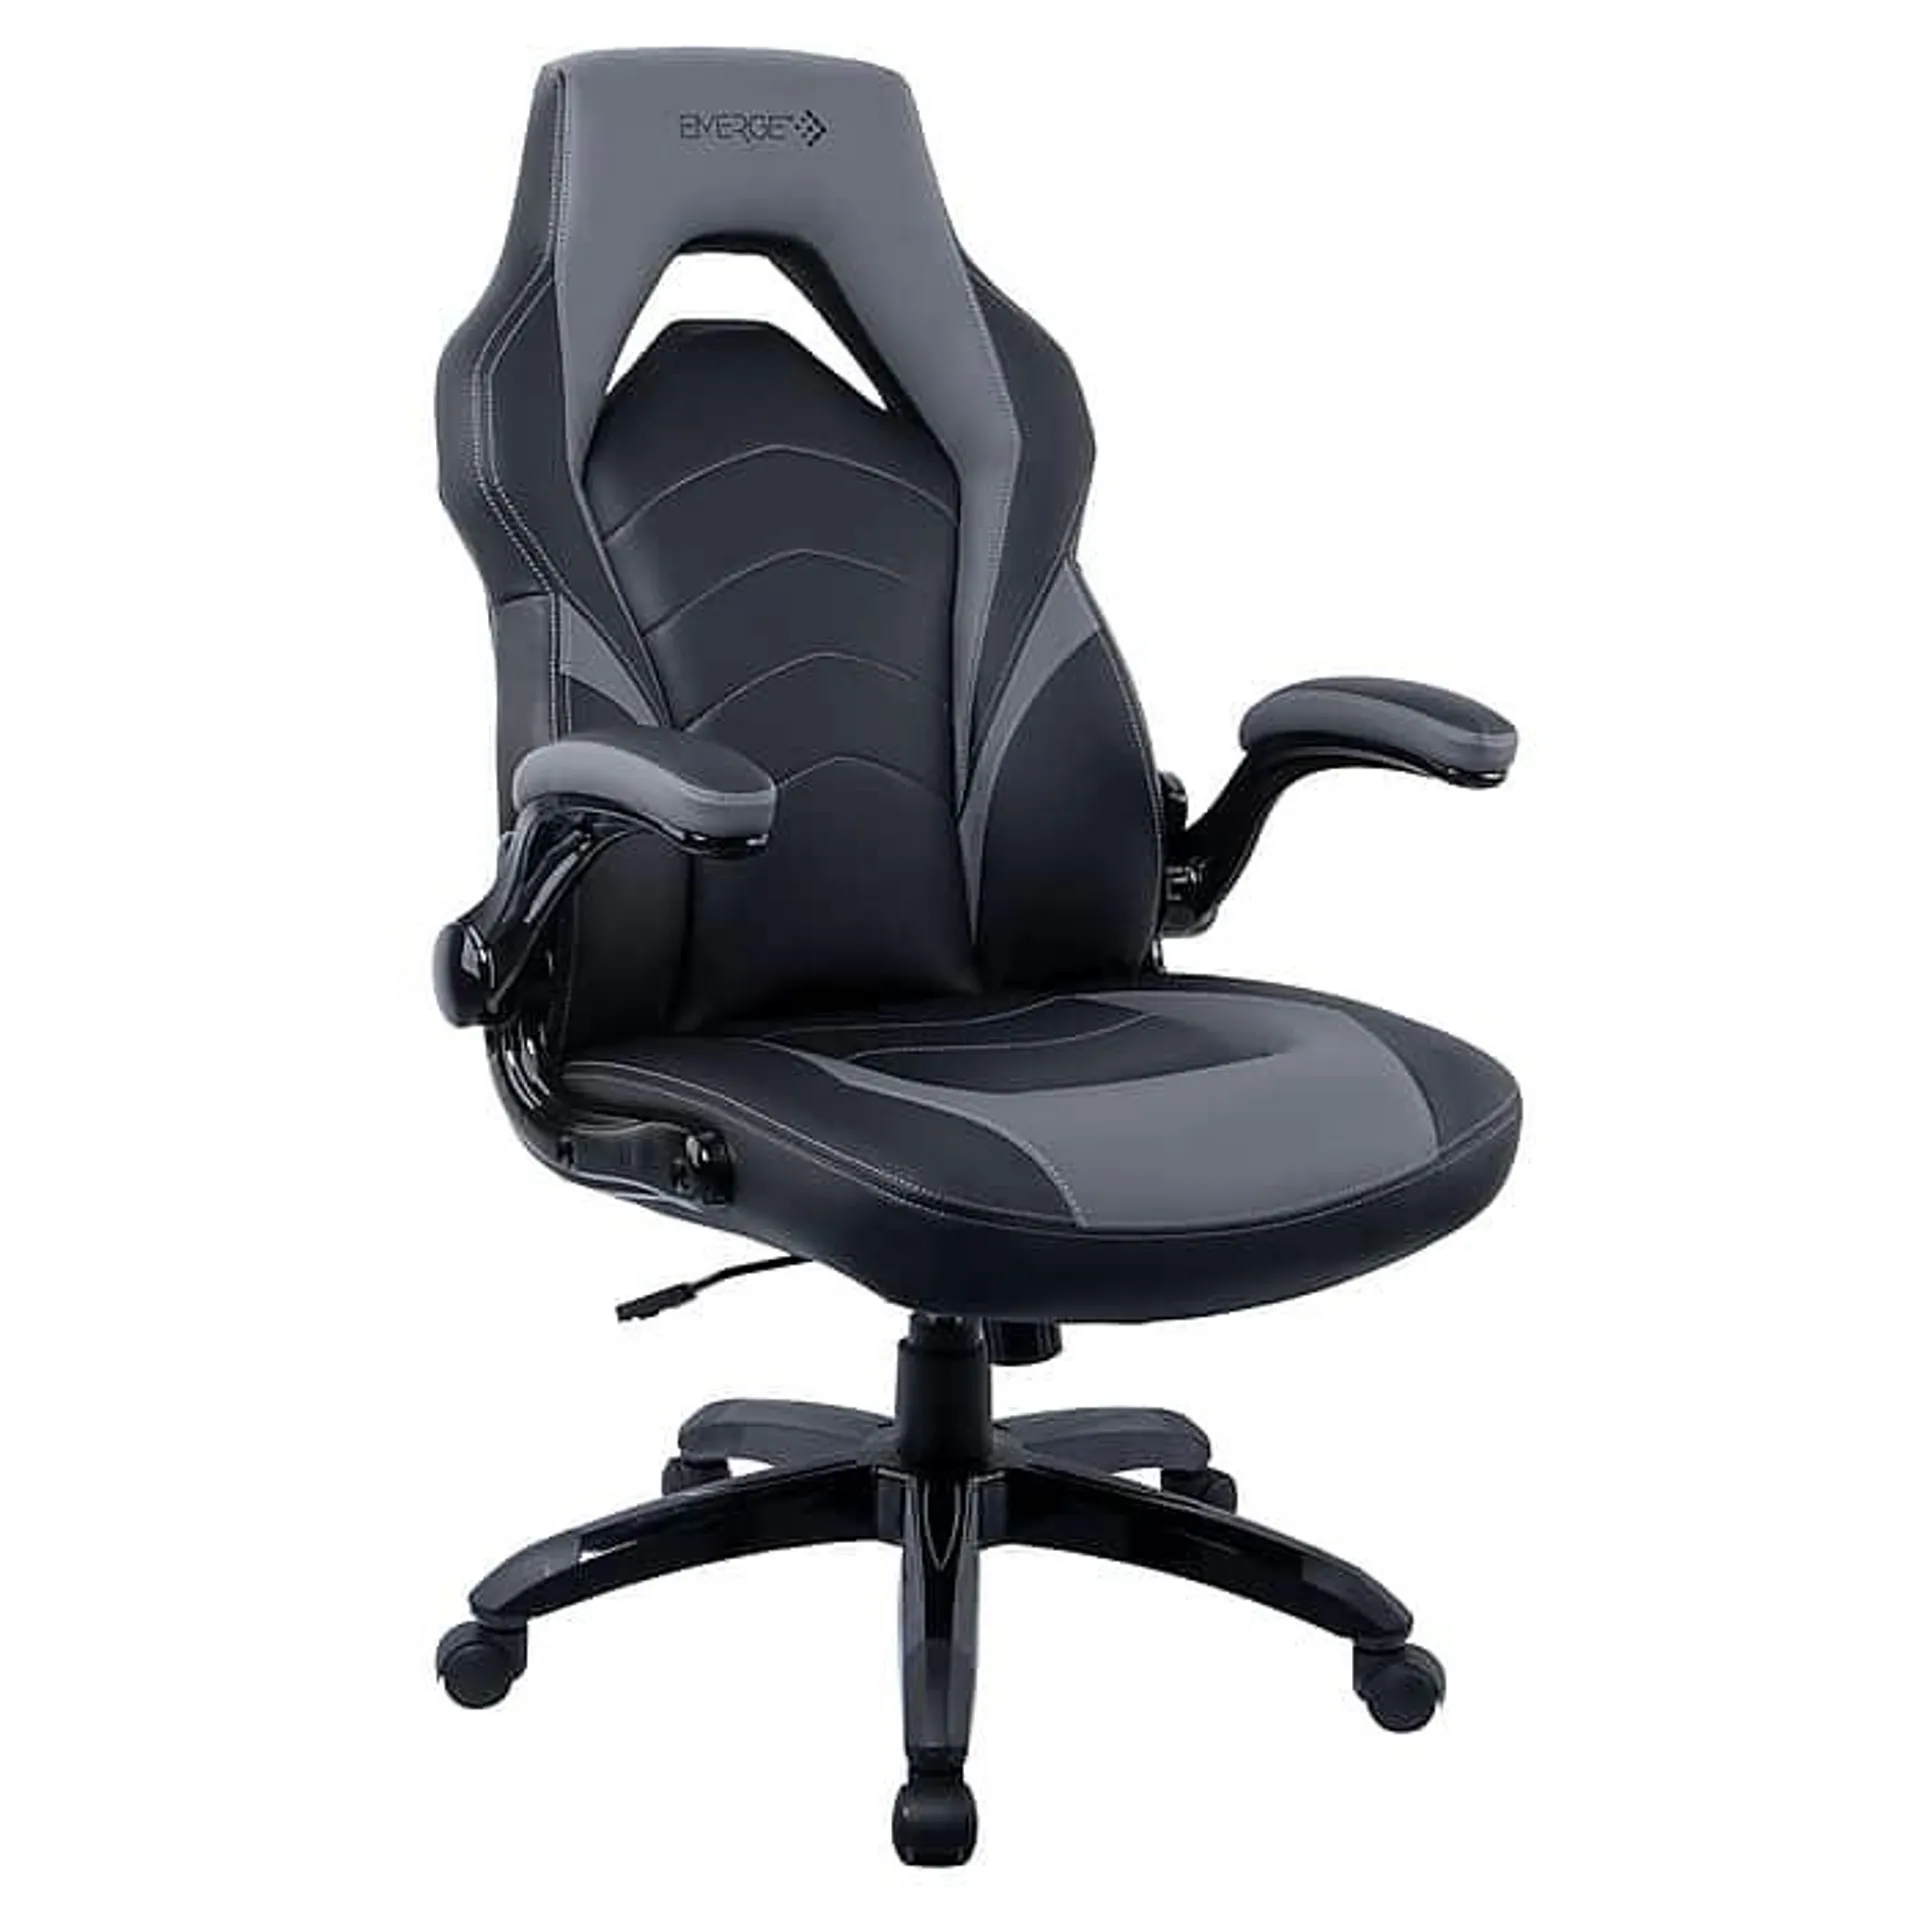 Staples Emerge Vortex Bonded Leather Gaming Chair,